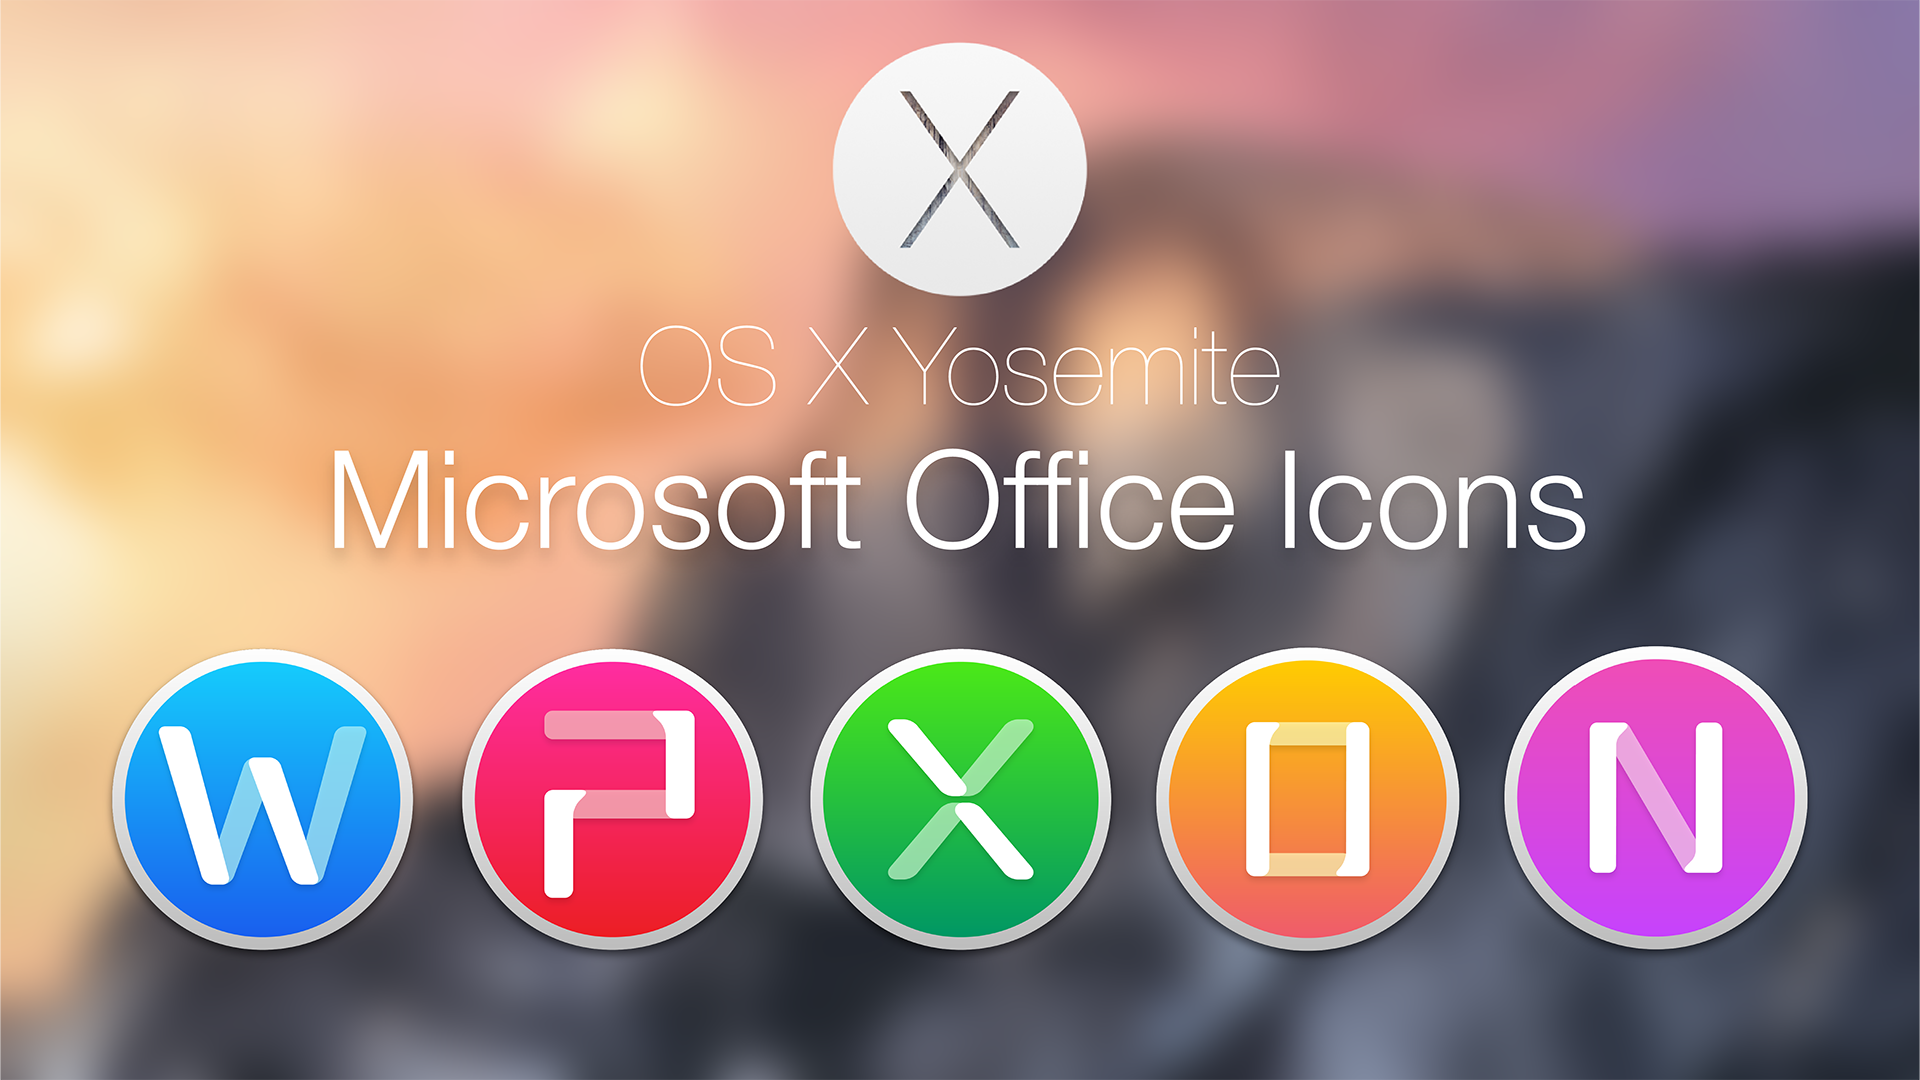 Microsoft Office 2011 Yosemite Style By Hamzasaleem Microsoft Office 2011 Yosemite Style By Hamzasaleem - Microsoft Office, Transparent background PNG HD thumbnail